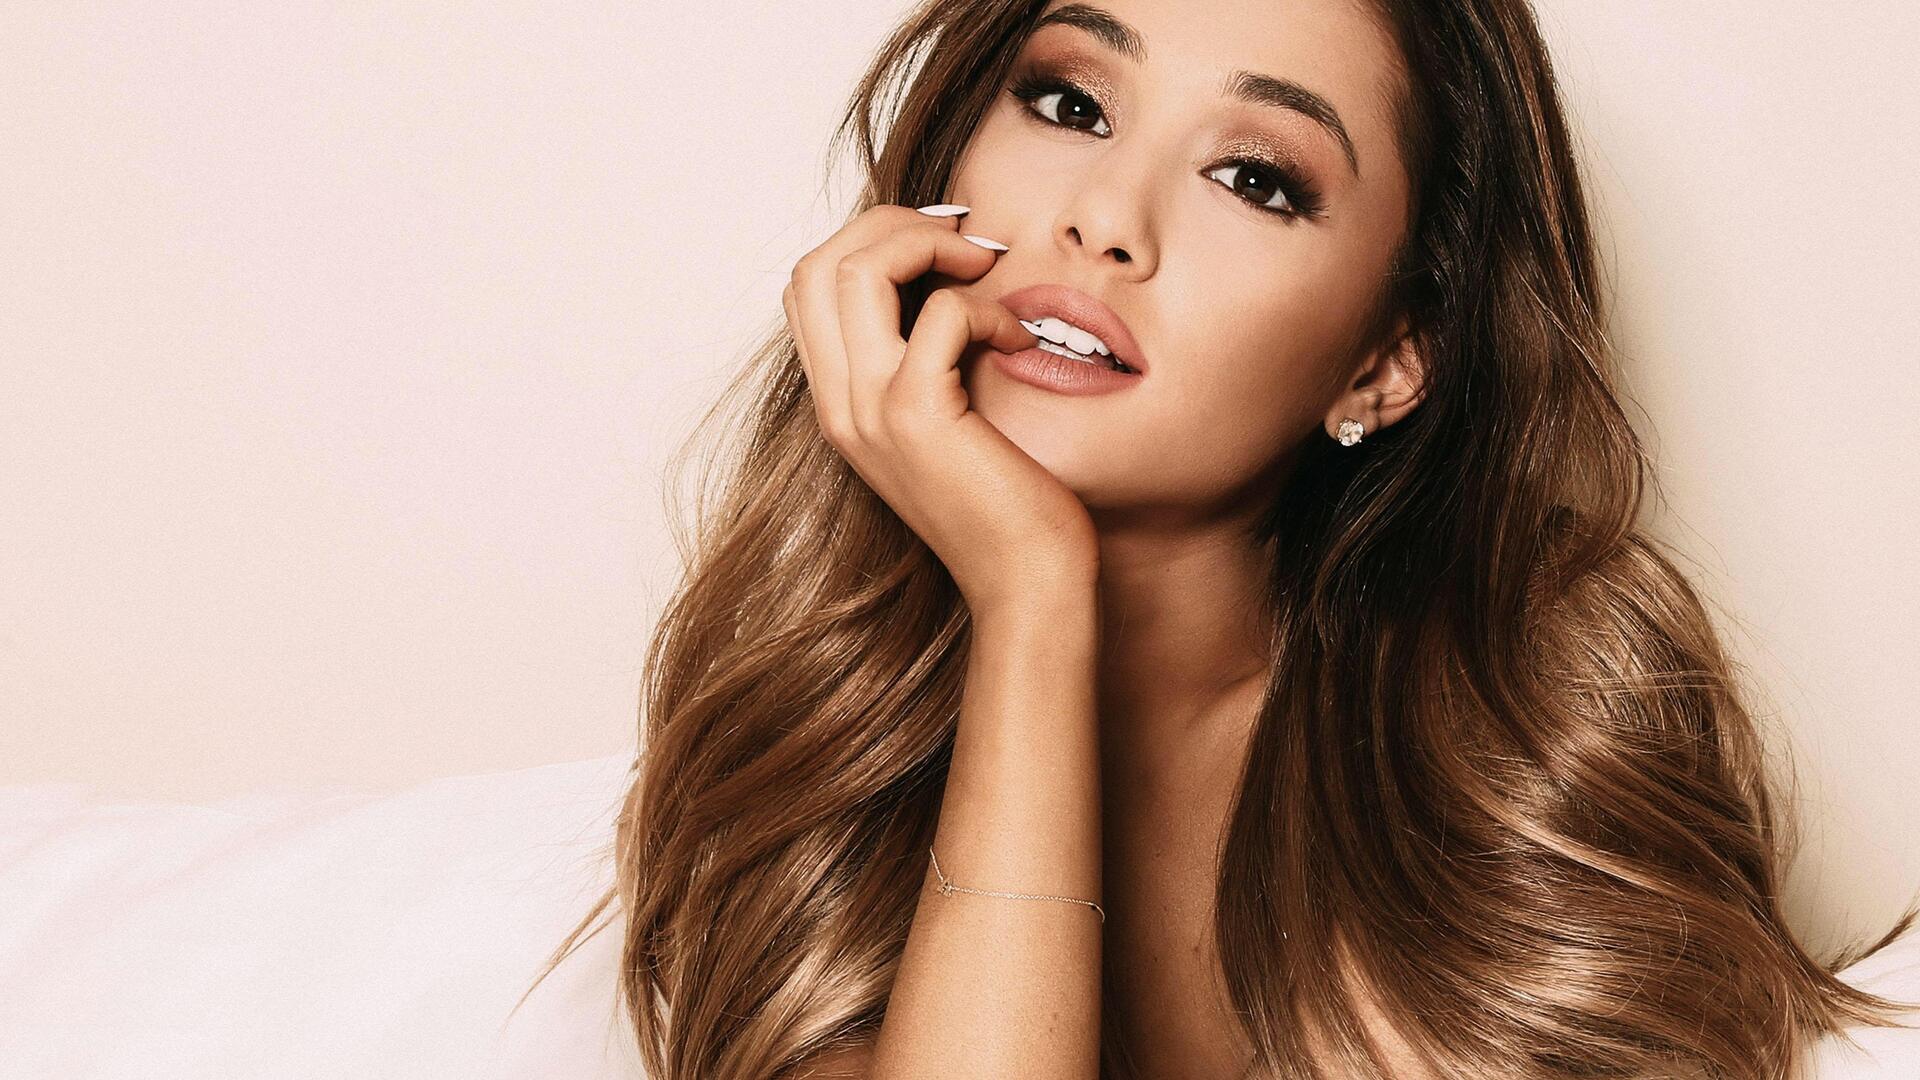 4k Ariana Grande Laptop Full HD 1080P HD 4k Wallpaper, Image, Background, Photo and Picture